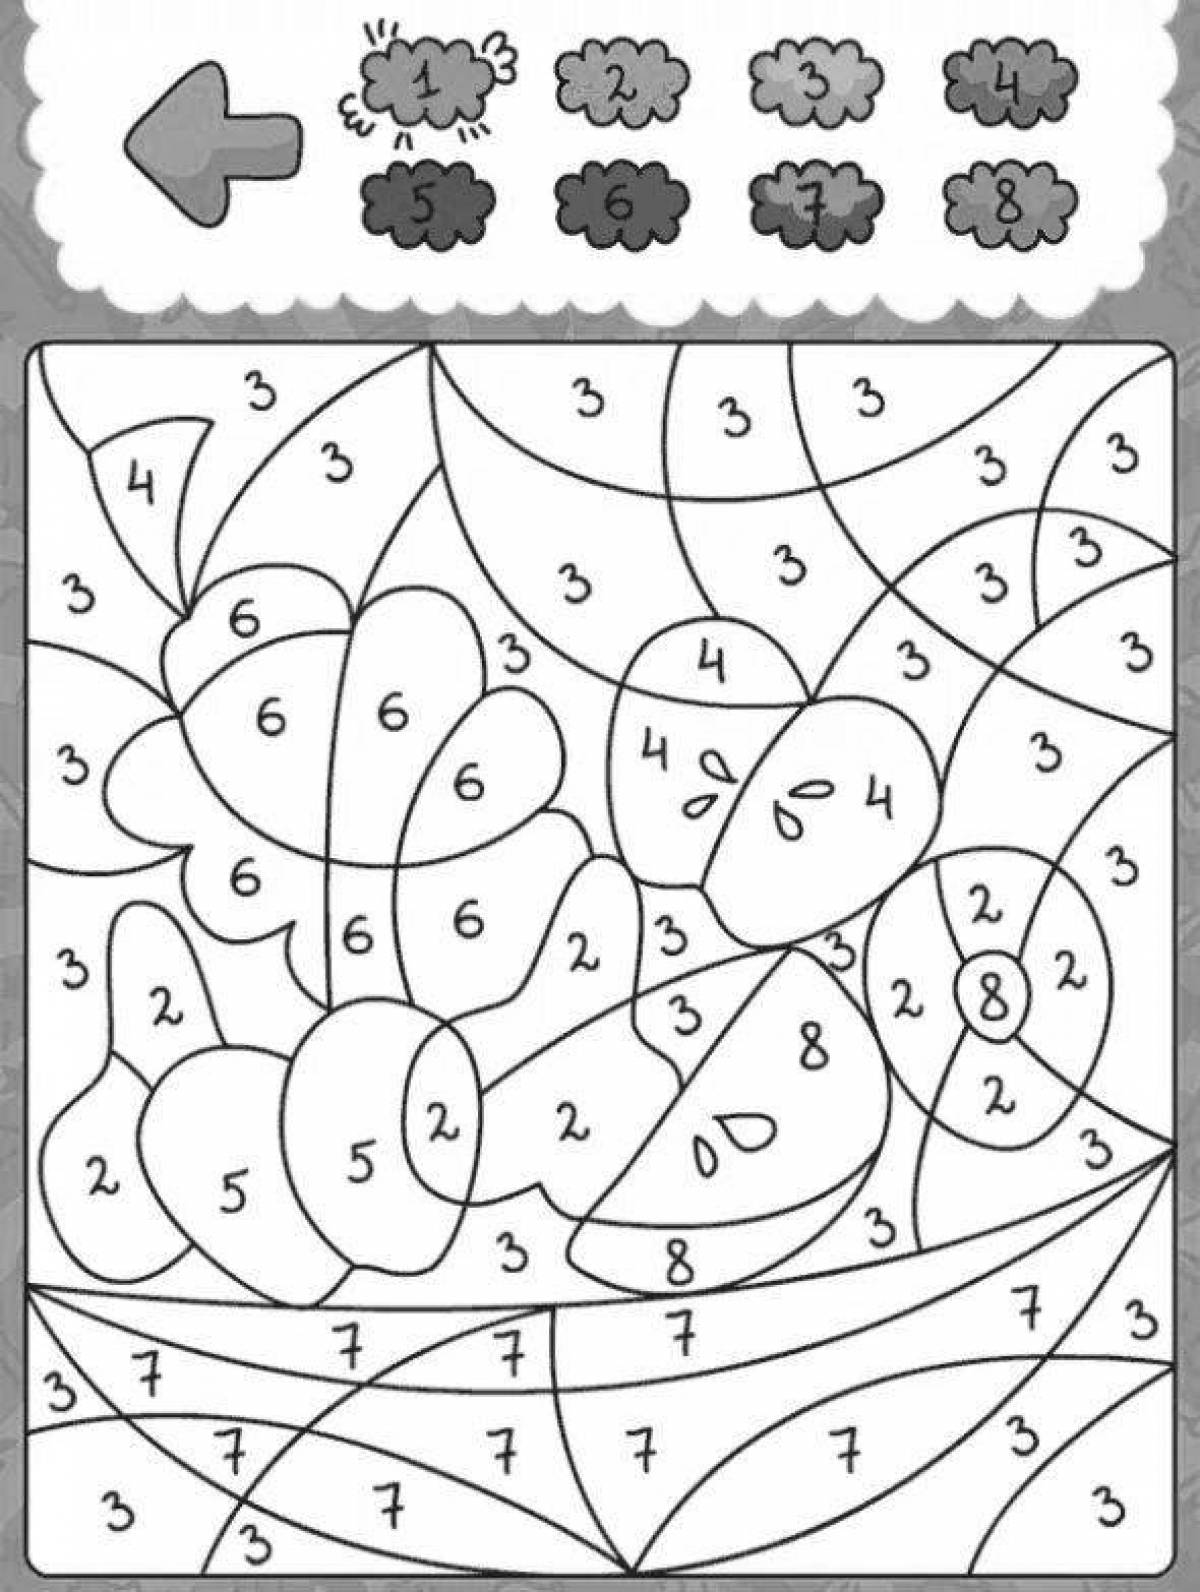 Amazing coloring page 3 task